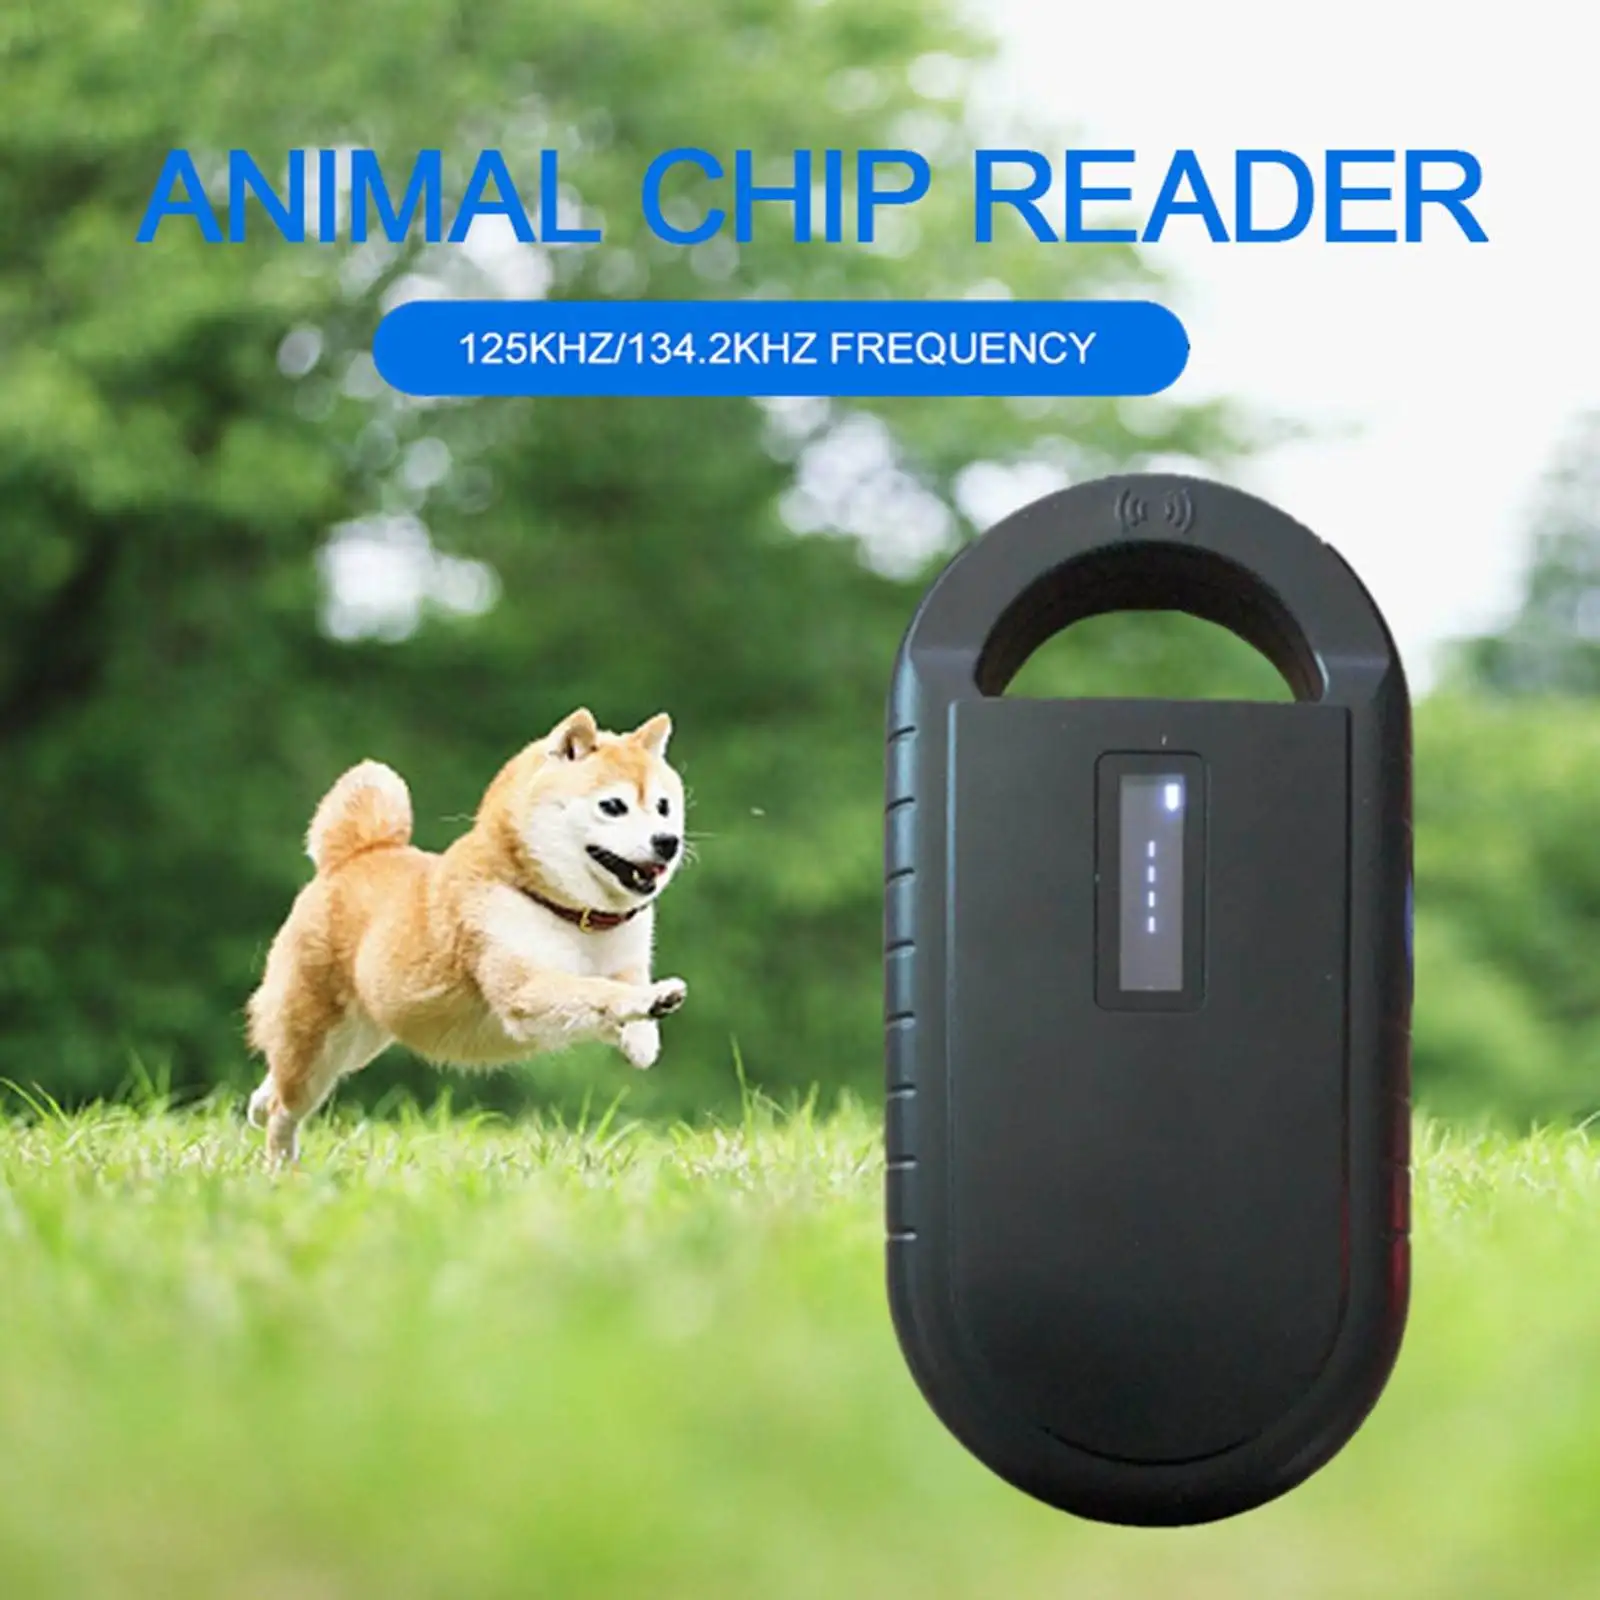 DDZ Universal Pet Microchip Scanner 134.2kHz/125kHz FDX-A/FDX-B/EMID/HDX RFID Pet Dog Microchip Reader Read All Format Chips with USB Portable Charging and 1000 Data Records for Animal/Pet/Dog/Cat/Pi 